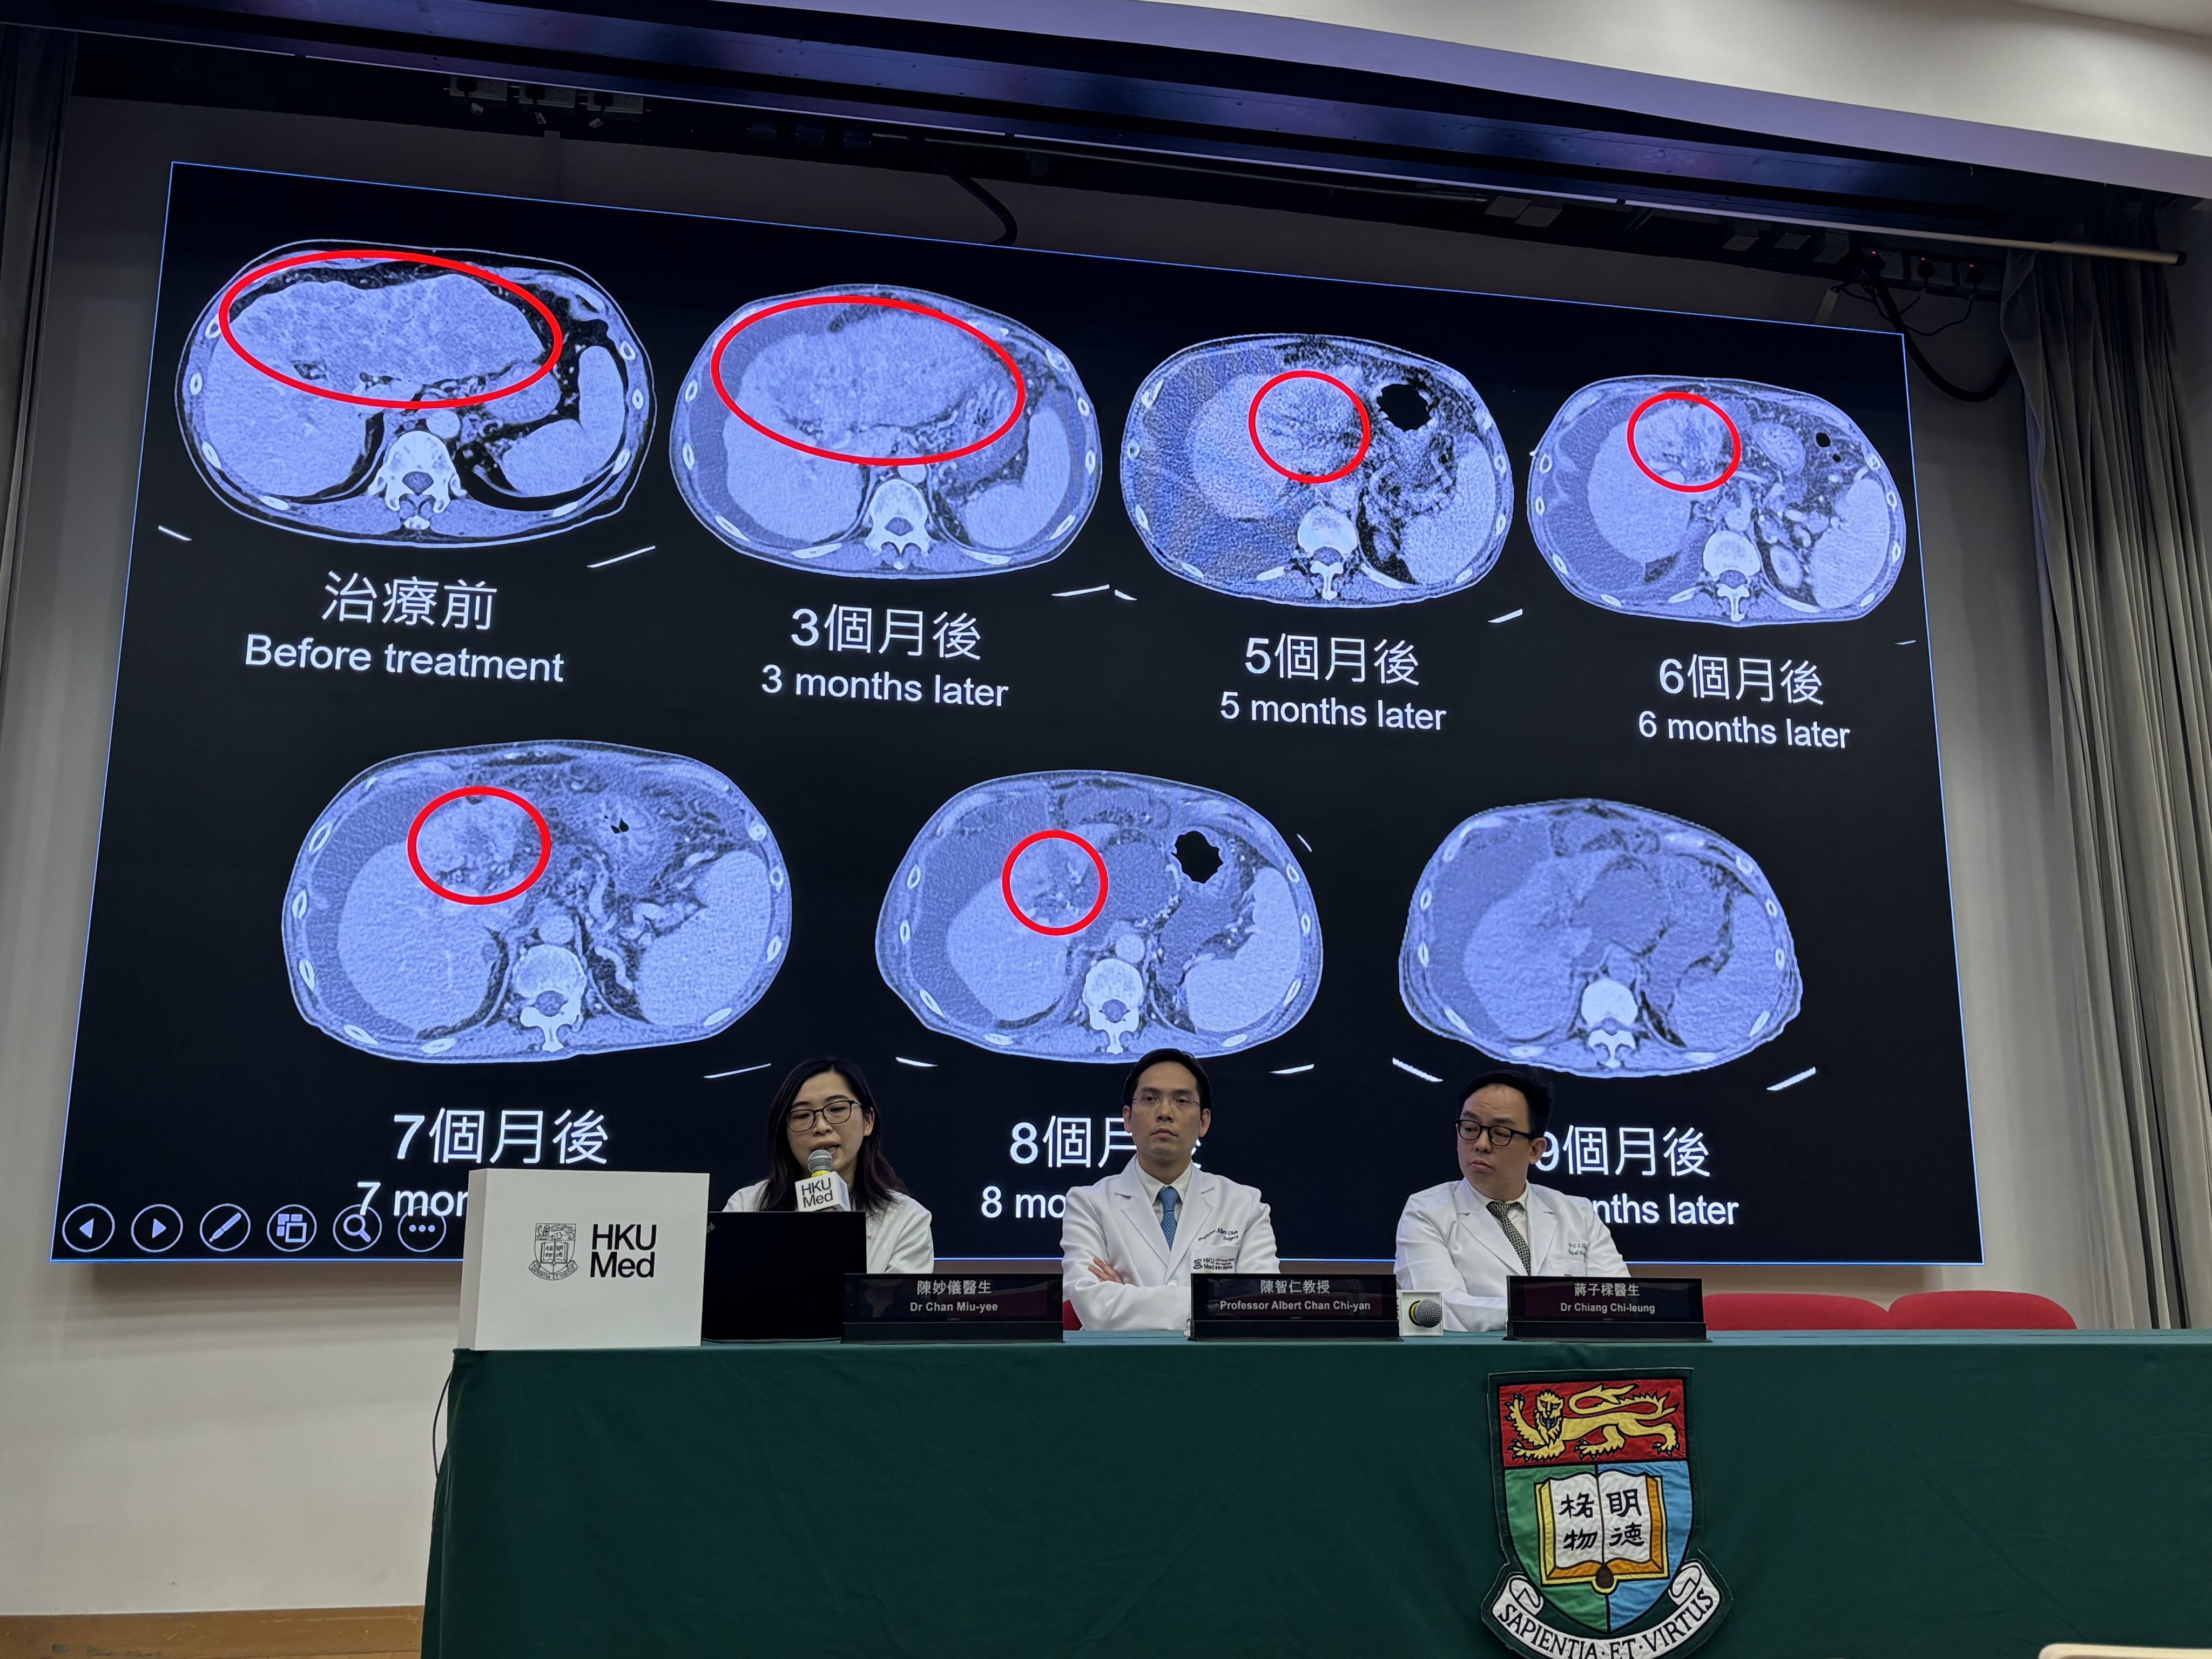 Professor Albert Chan (centre) with members of his team meet the press on Wednesday. “The team is honoured to provide new hope and possibilities for the treatment of liver cancer,” he said. Photo: Connor Mycroft